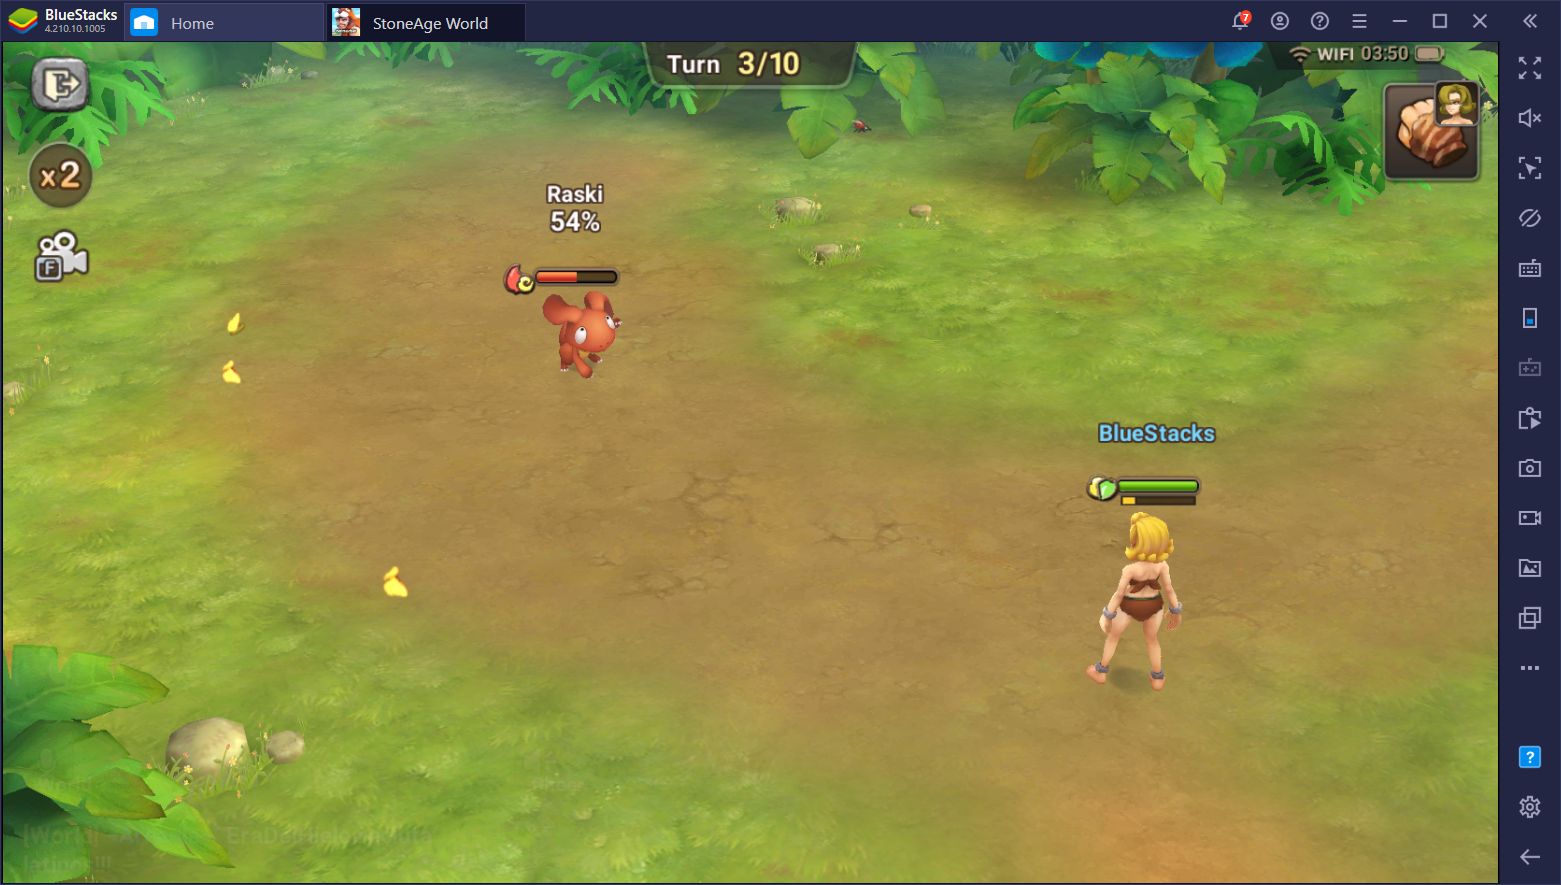 StoneAge World - How to Catch Pets in this Pokémon-Like RPG